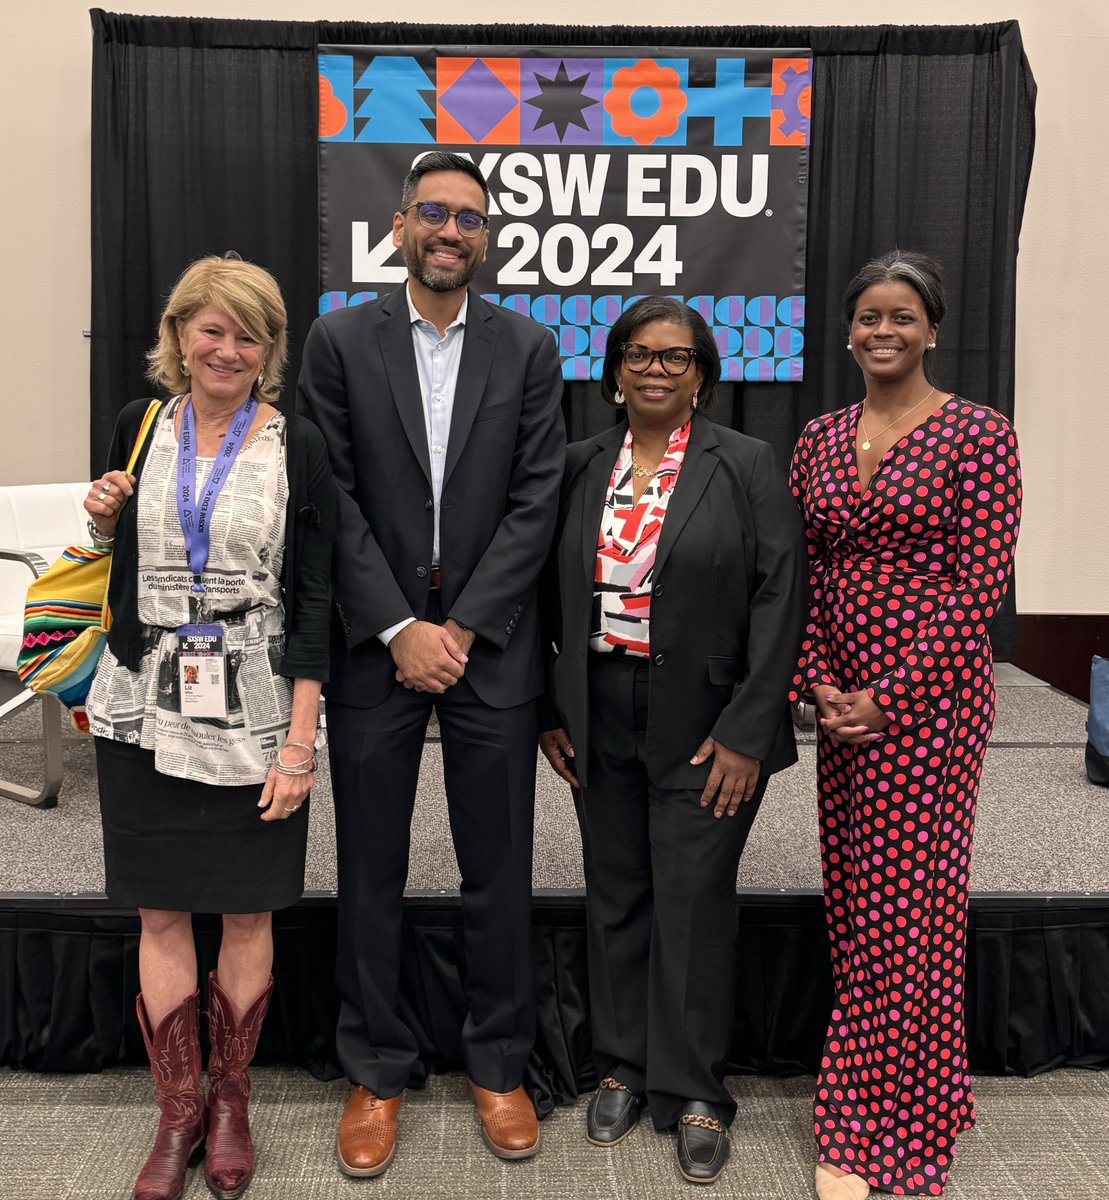 Honored to moderate panel with thoughtful educators trying to figure out post affirmative action landscape ⁦@SXSWEDU⁩ w/⁦@1MillionDegrees⁩ ⁦⁦@EdEquityLab⁩ ⁦@UMich⁩